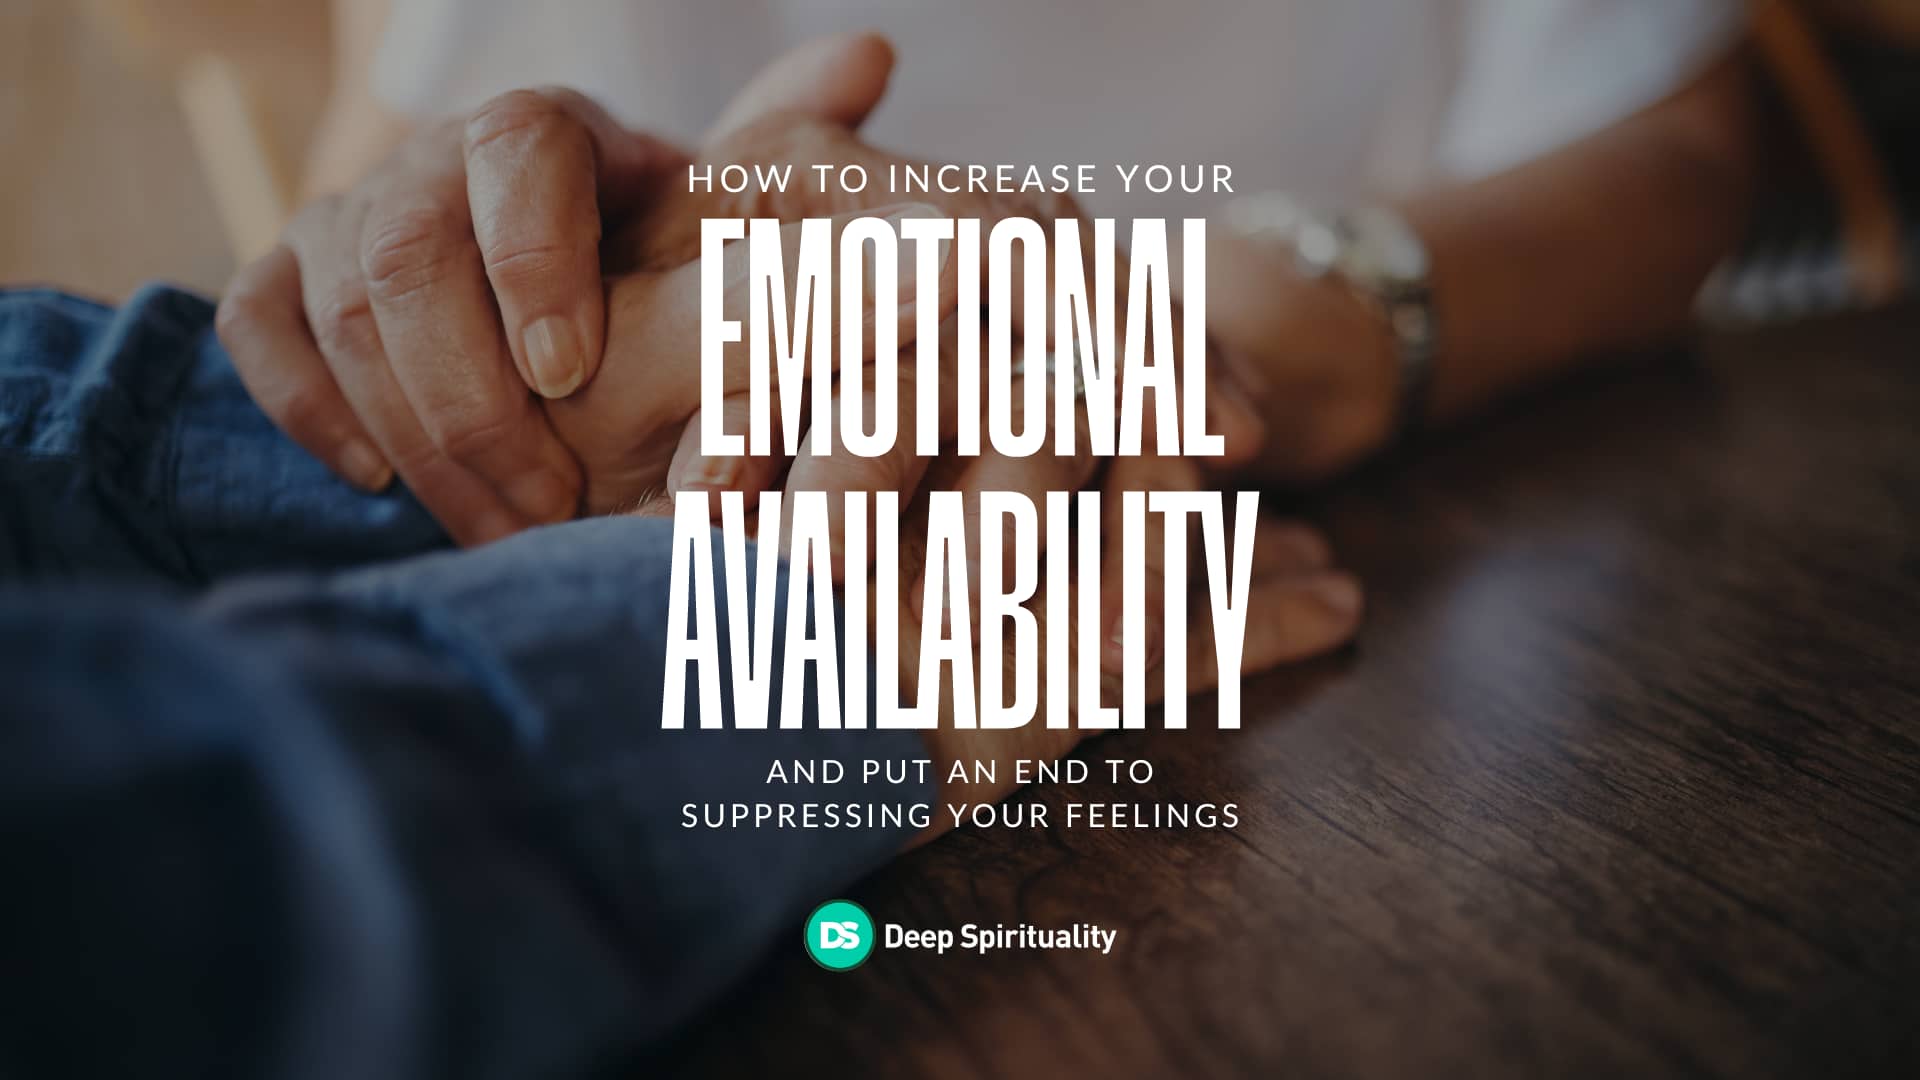 How to Increase Your Emotional Availability and Put an End to Suppressing Your Feelings 8